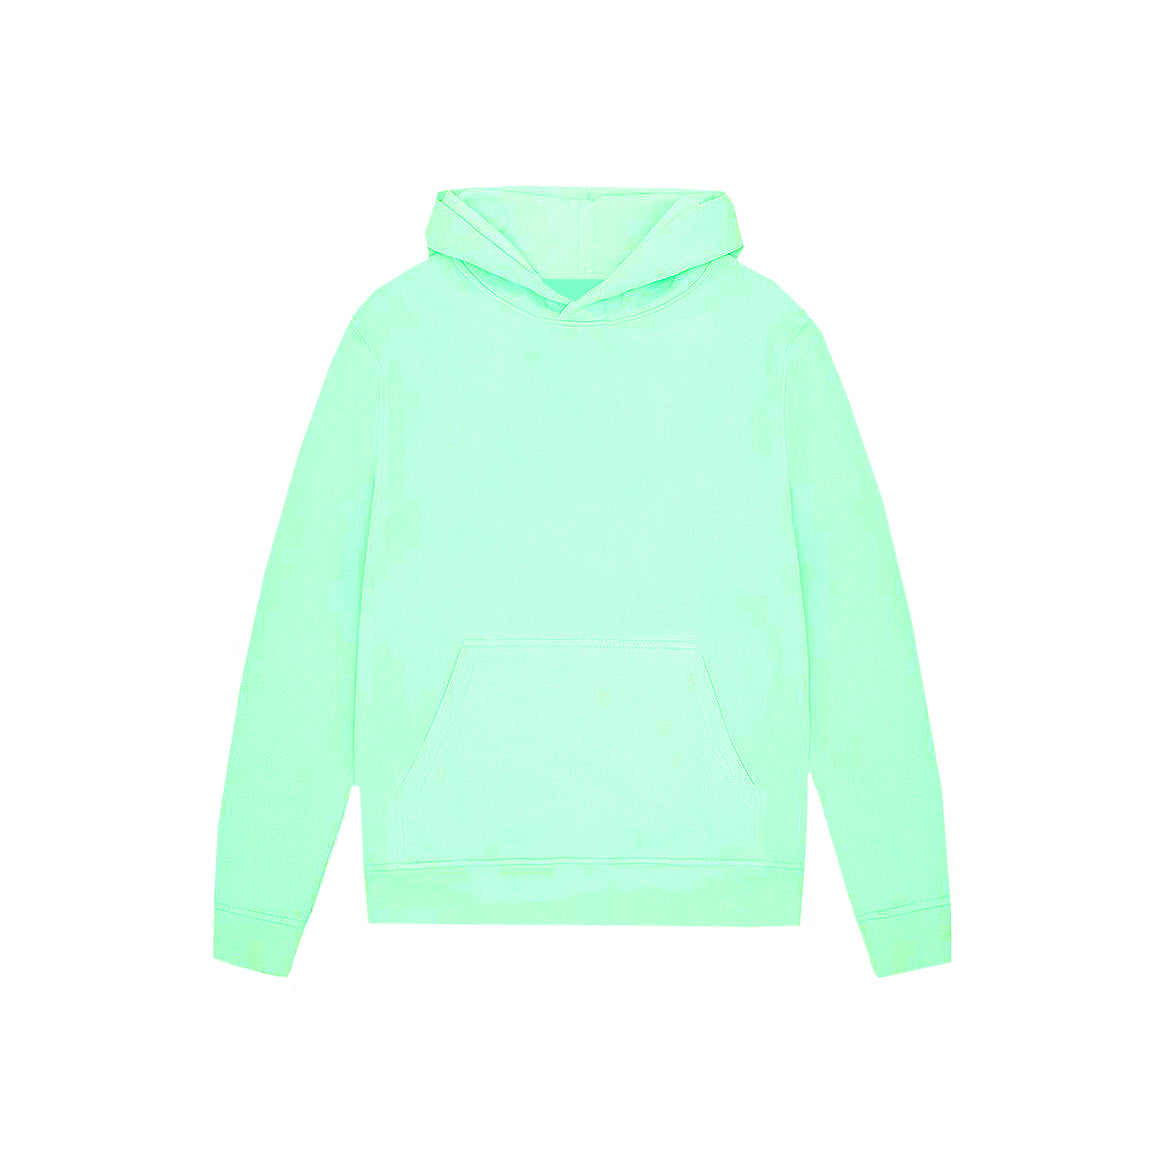 54 FLORAL PREMIUM PULLOVER HOODY - PEPPERMINT BLUE